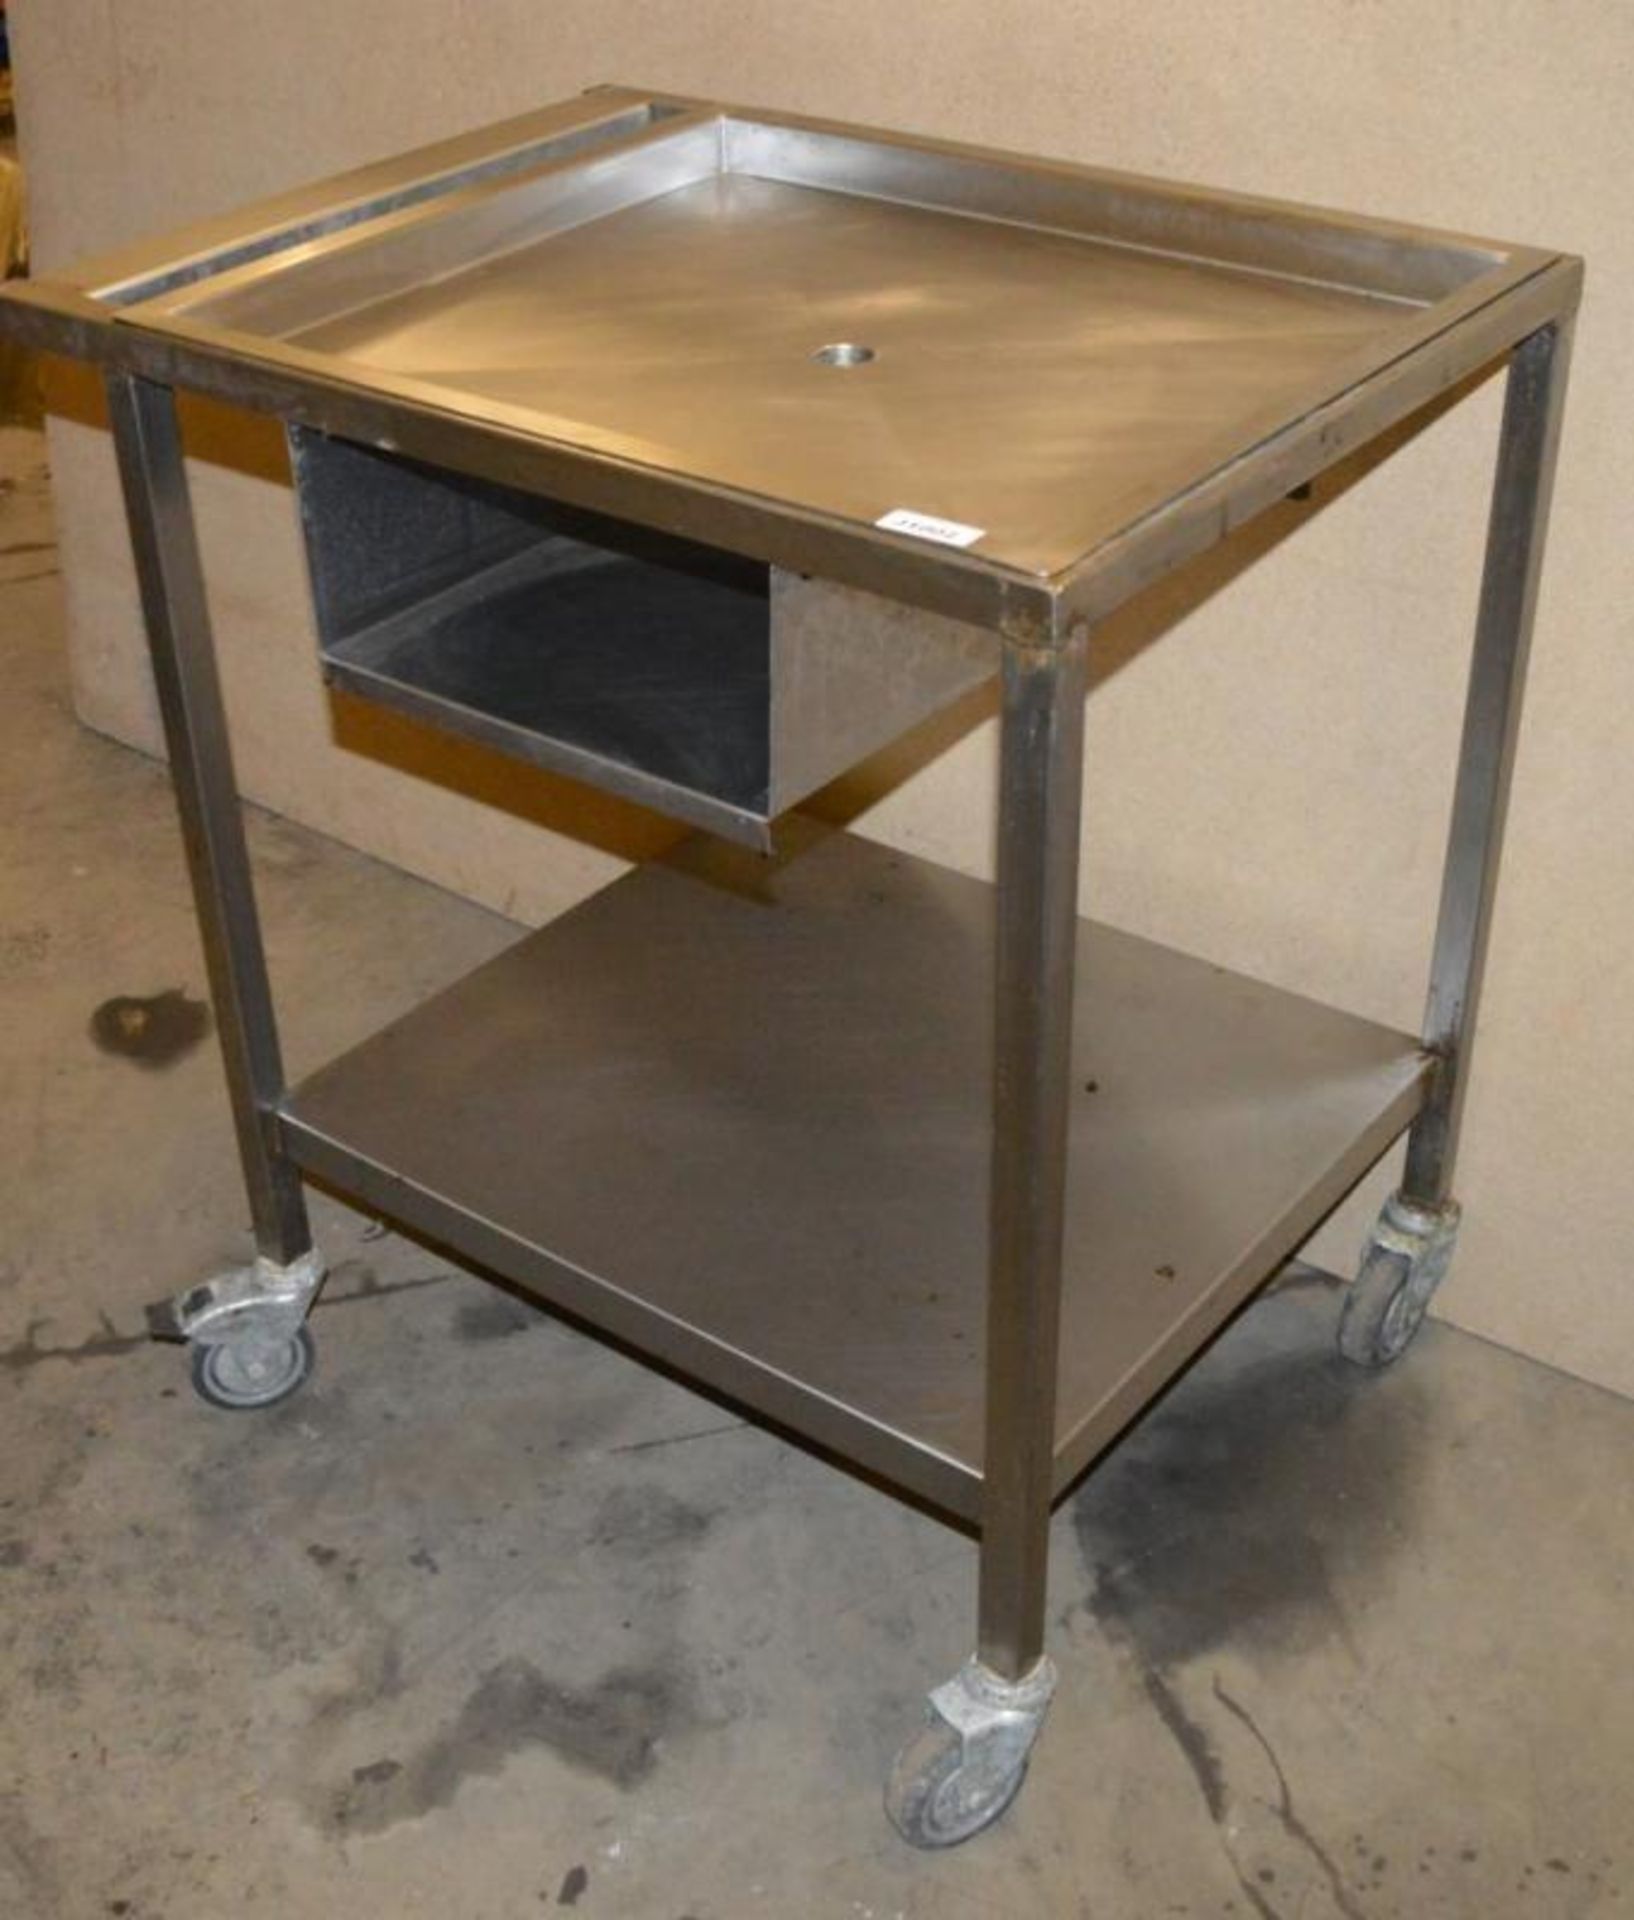 1 x Wheeled Stainless Steel Prep Bench with Drain Hole - Dimensions: 81.5 x 60.5 x 88cm - Ref: J1002 - Image 3 of 4